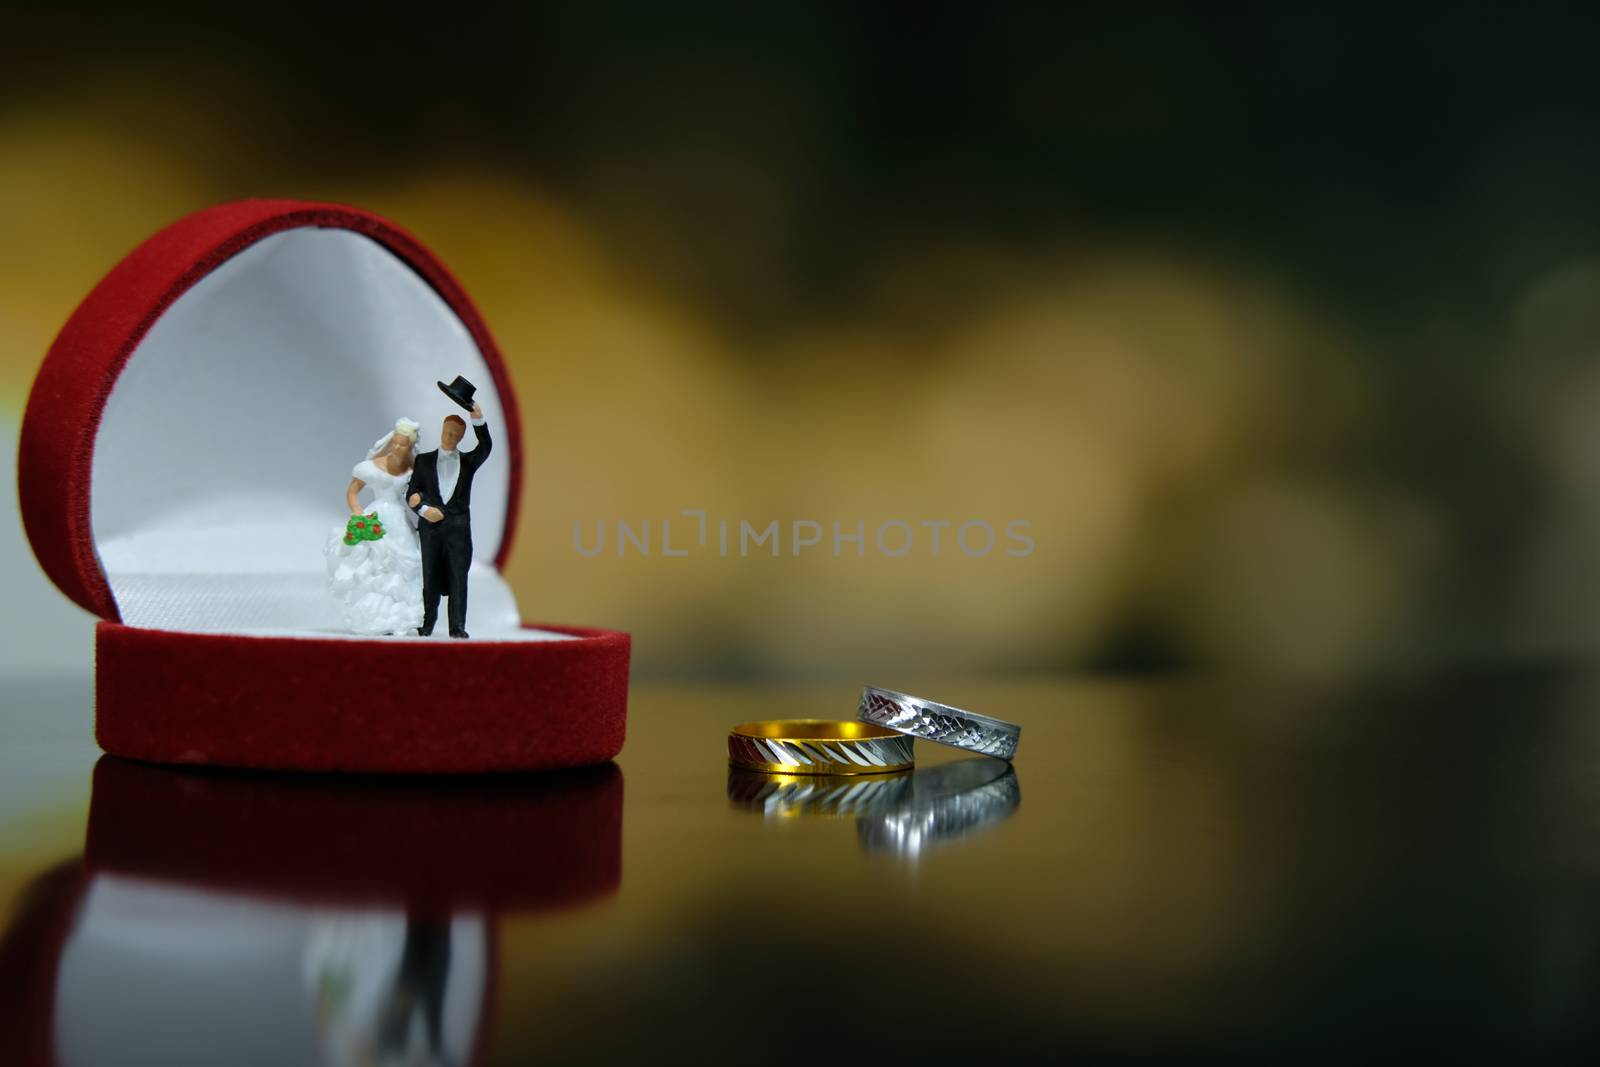 Miniature wedding concept. Bride and groom walking out make greeting above their wedding ring box. image photo by Macrostud